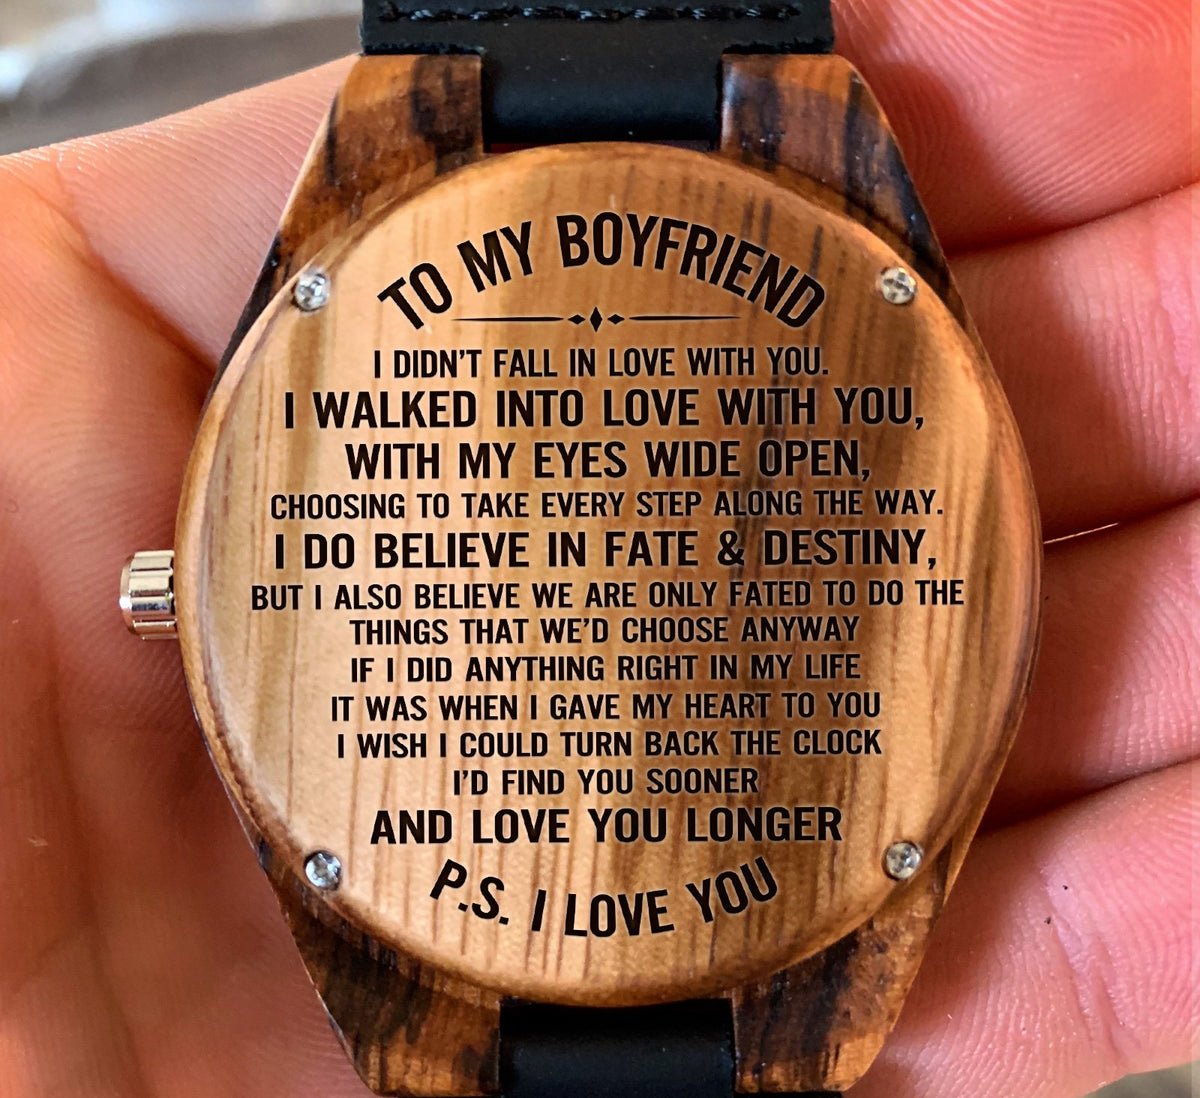 To My Boyfriend - I Walked into Love With You With My Eyes Wide Open - Wooden Watch